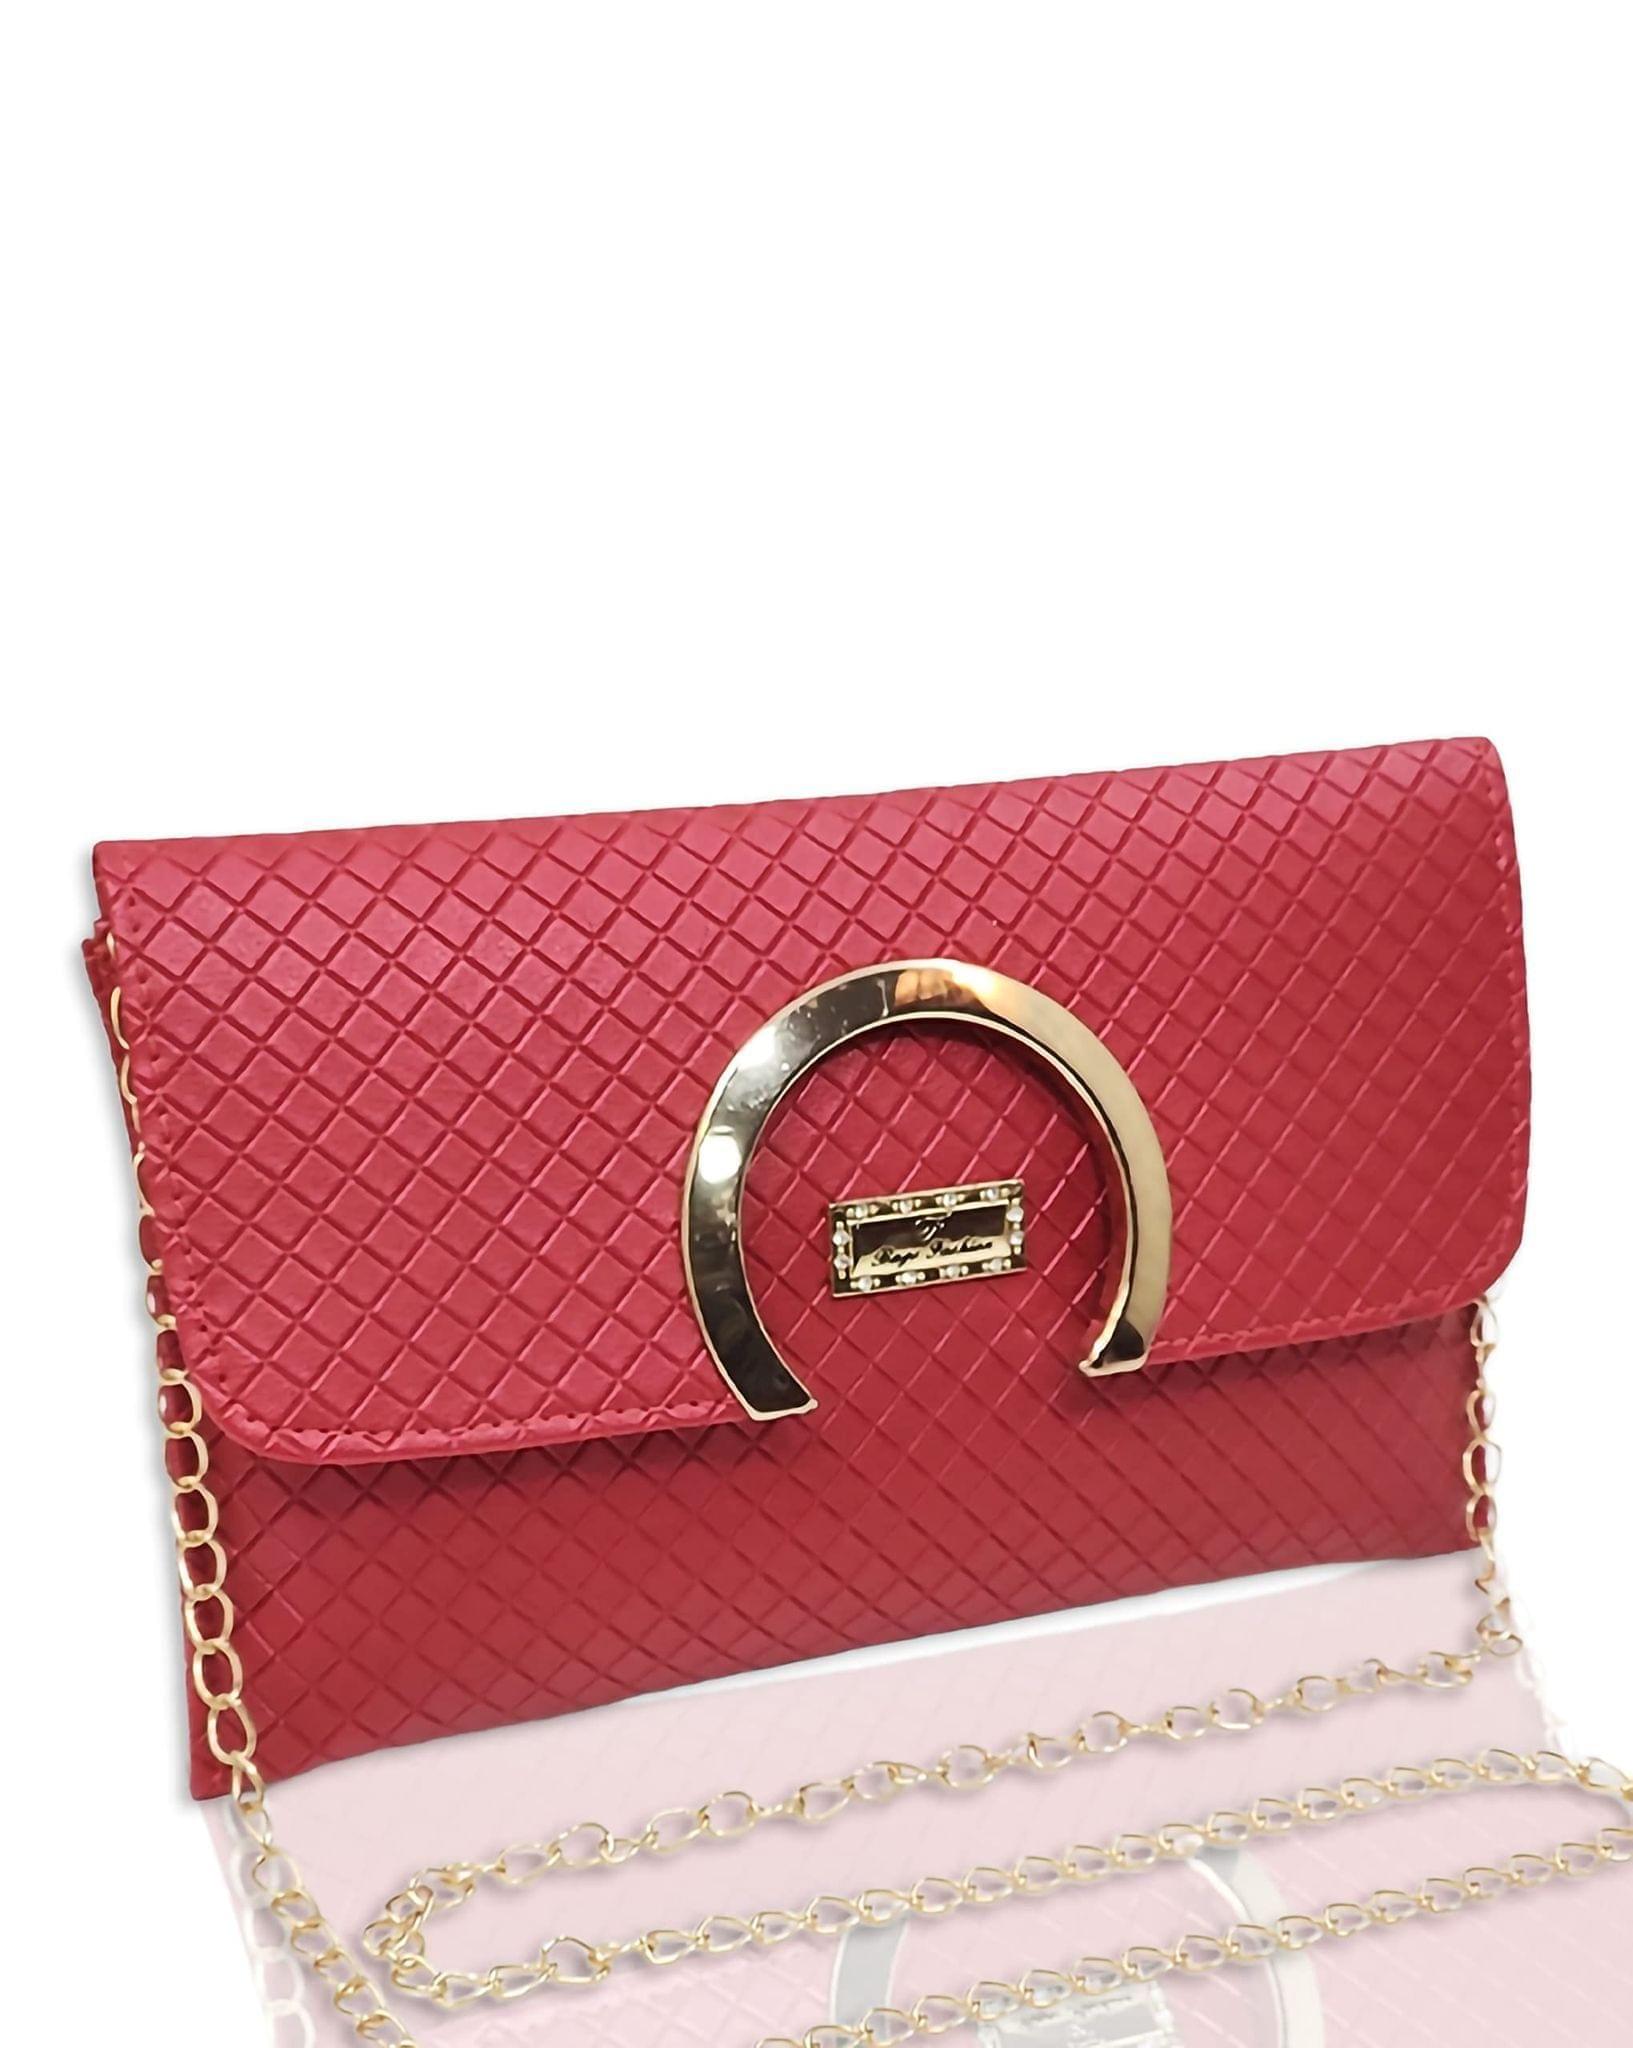 Western Montana West CROSSBODY bag Red – Southwest Bedazzle